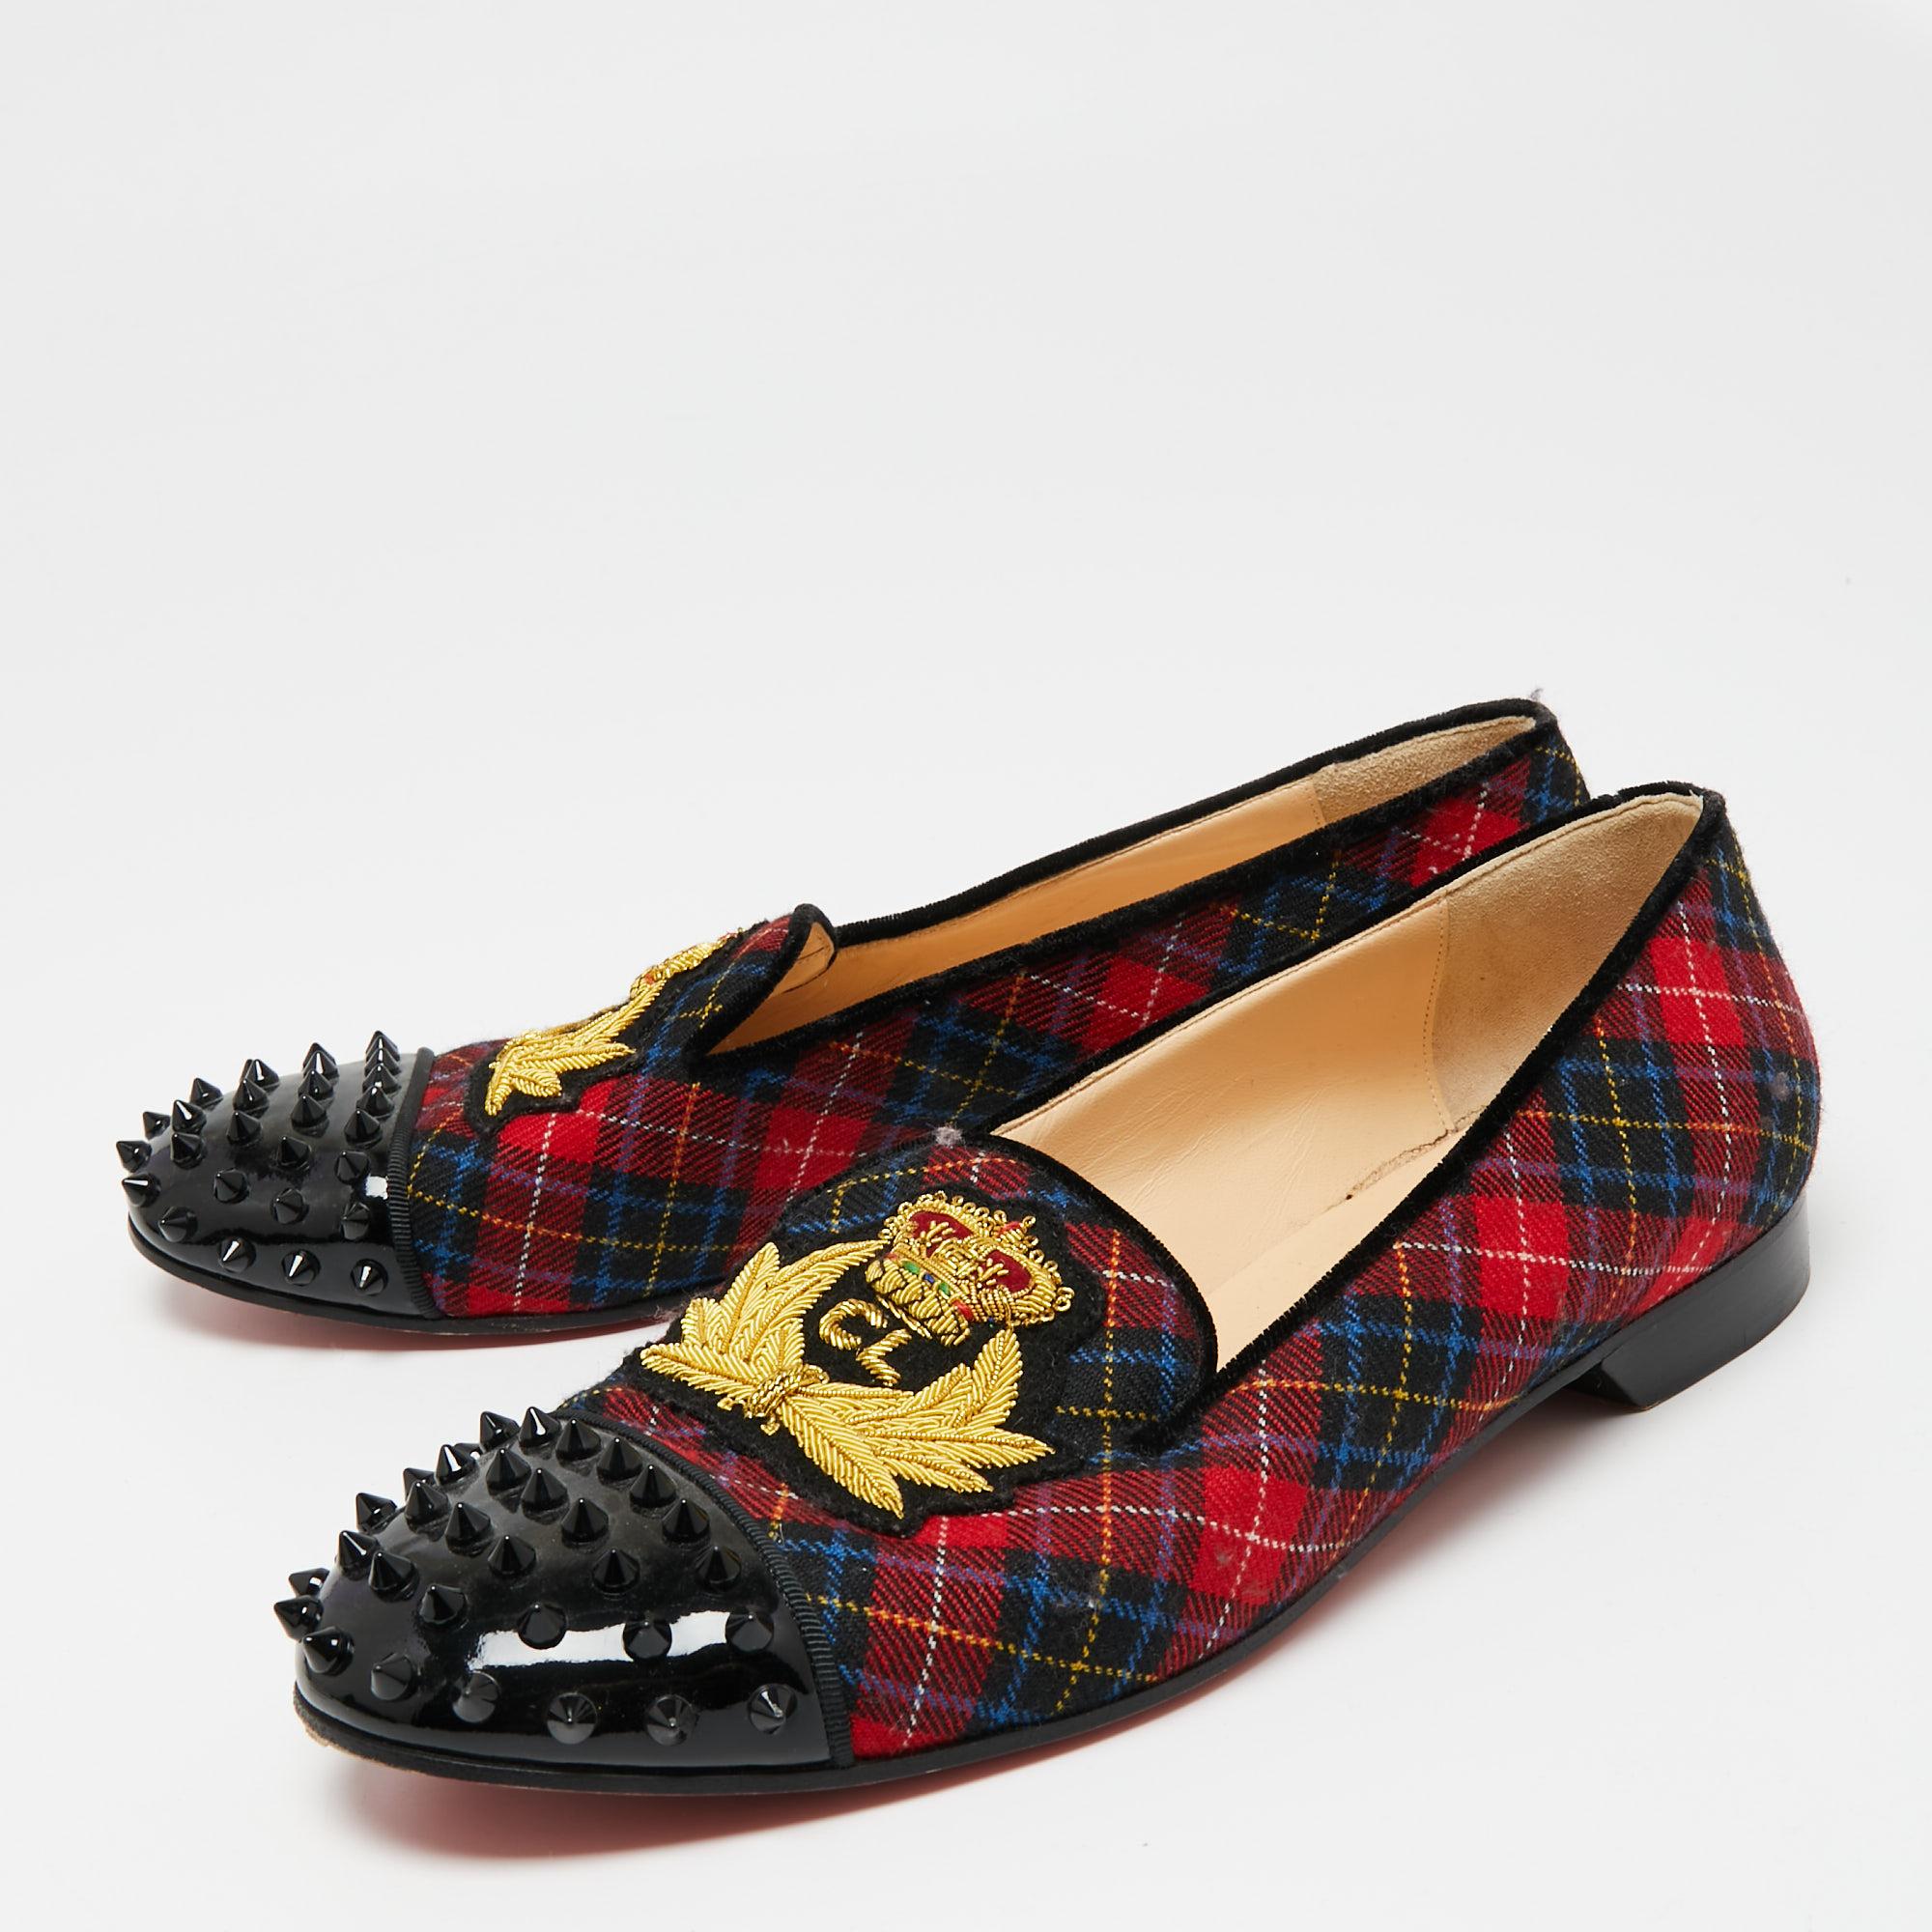 Project an ultra-luxe look in these loafers from Christian Louboutin! They have been crafted from tartan fabric and designed with studded patent leather toes, CL crest patch on the uppers, comfortable leather-lined insoles, and durable soles.

